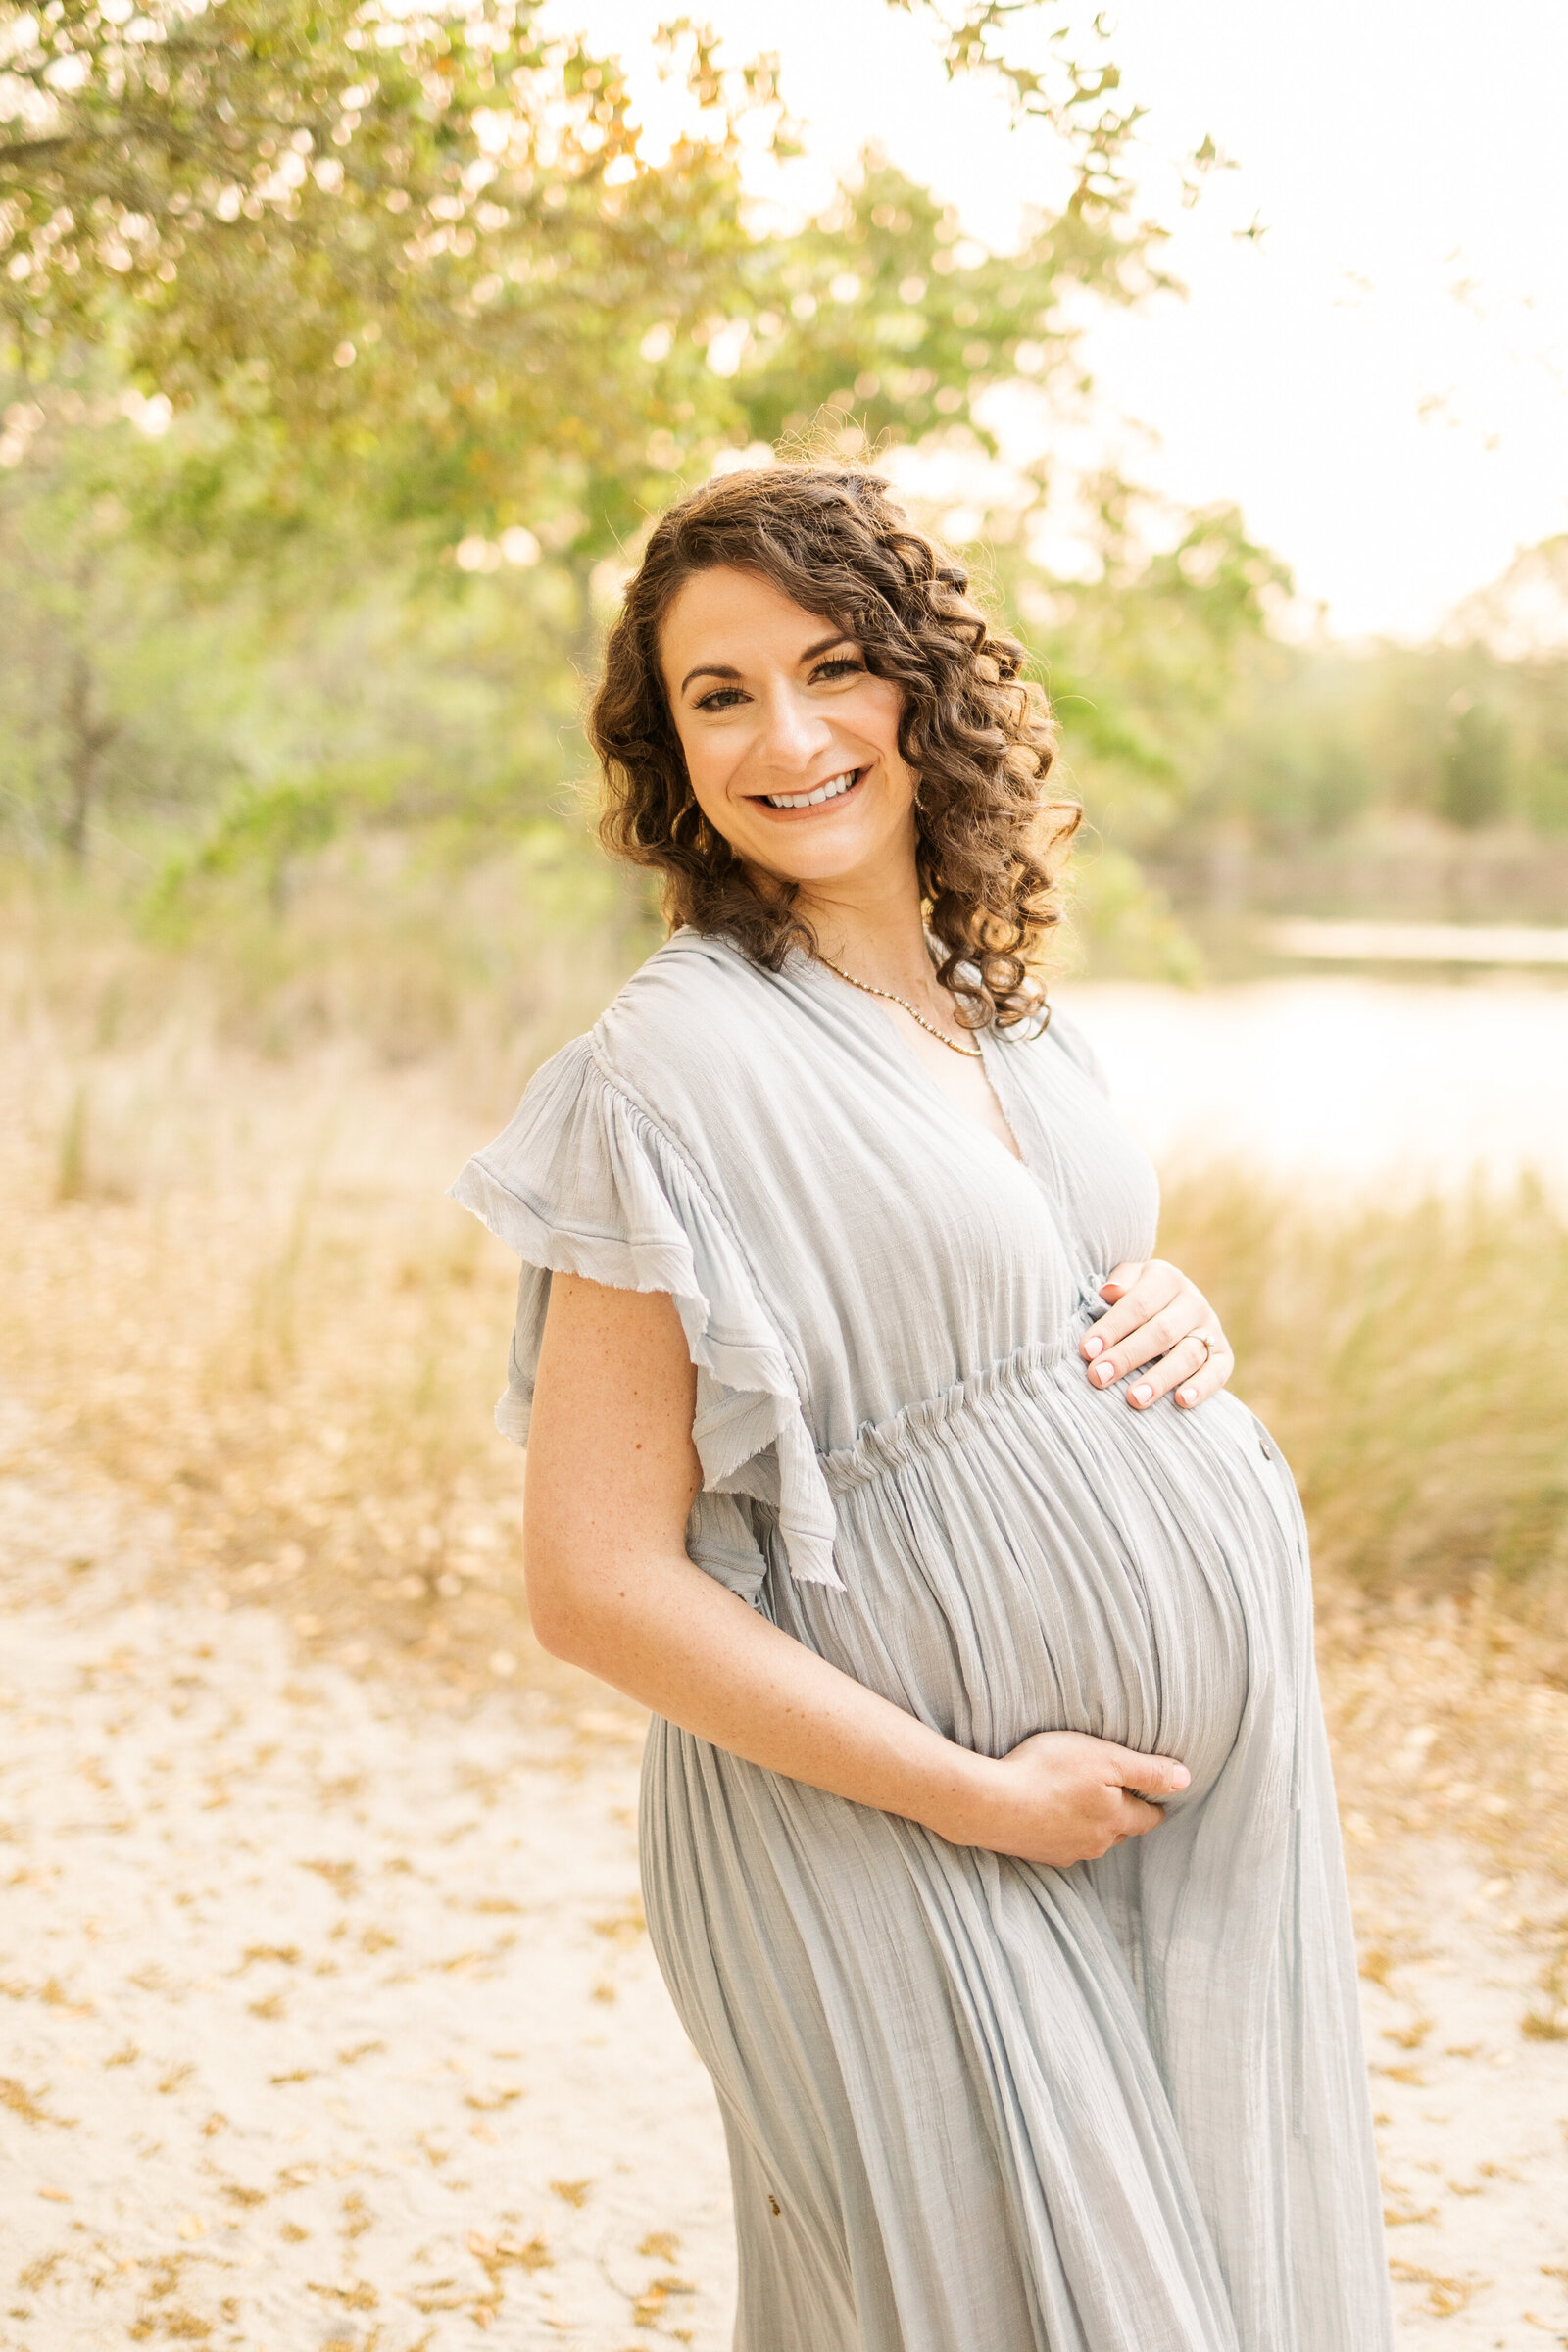 first-time-mom-smiling-maternity-portrait-virginia-beach